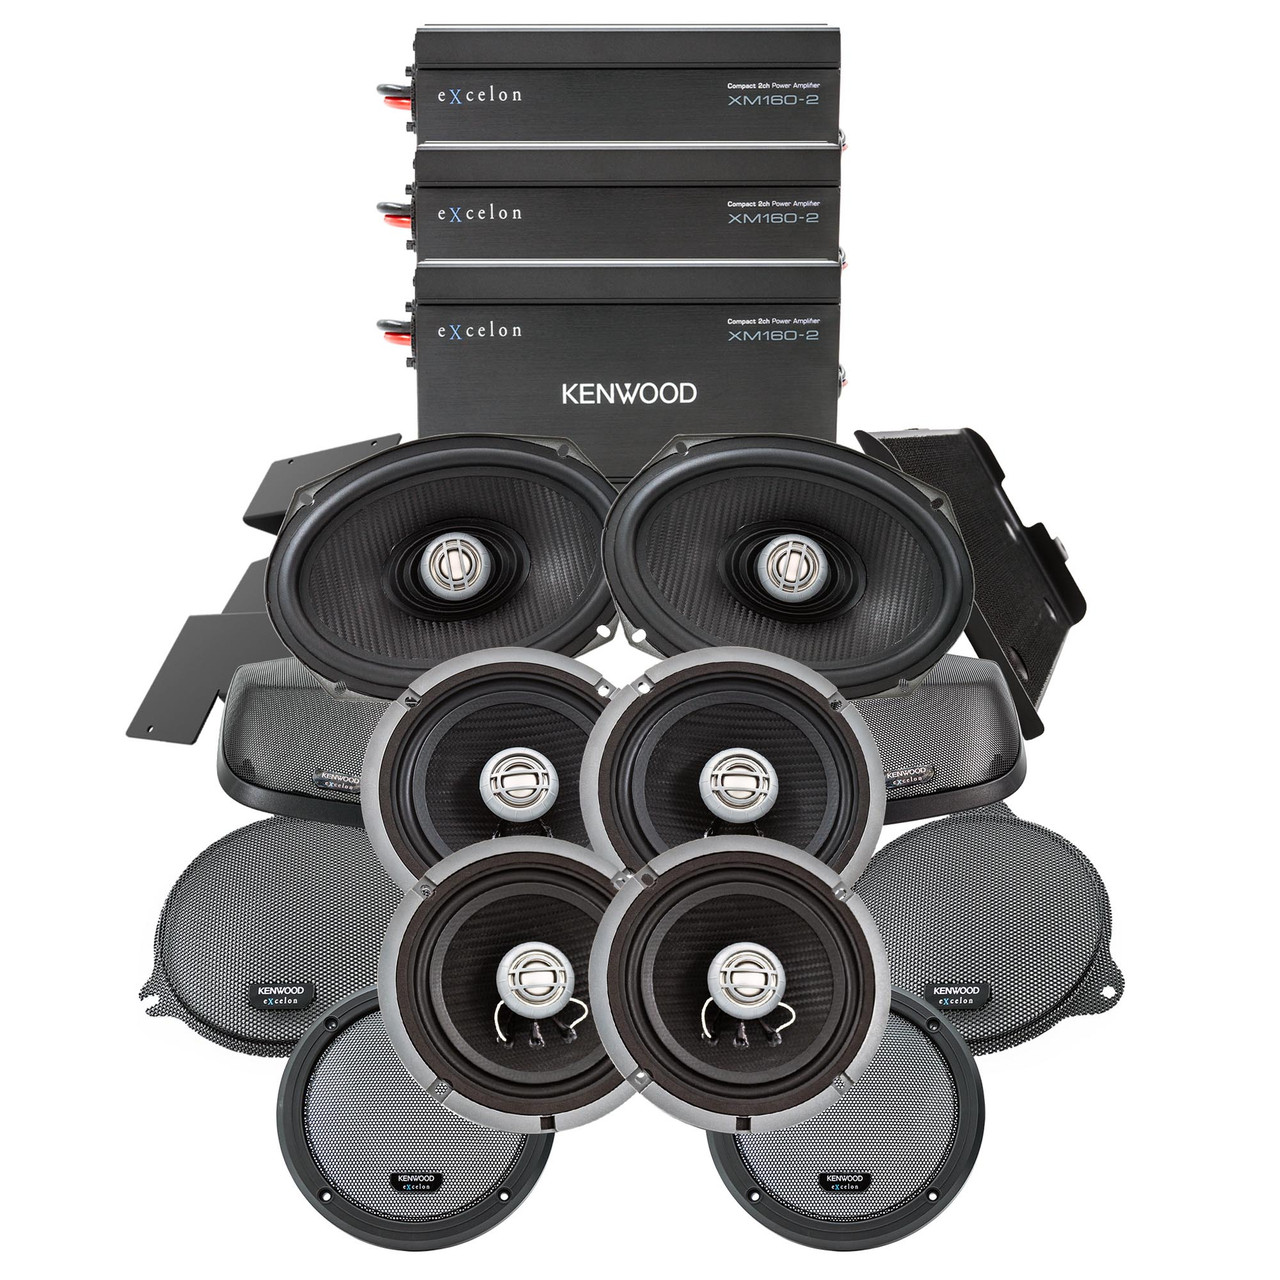 Dwaal Vervagen boezem Kenwood 3 2-Channel Amplifiers with 2 Pair of 6 1/2" Speakers and 1 Pair of  6x9" Speakers and Cut-In Lid Plug and Play Kit for 2014+ Ultra Motorcycles  - Creative Audio